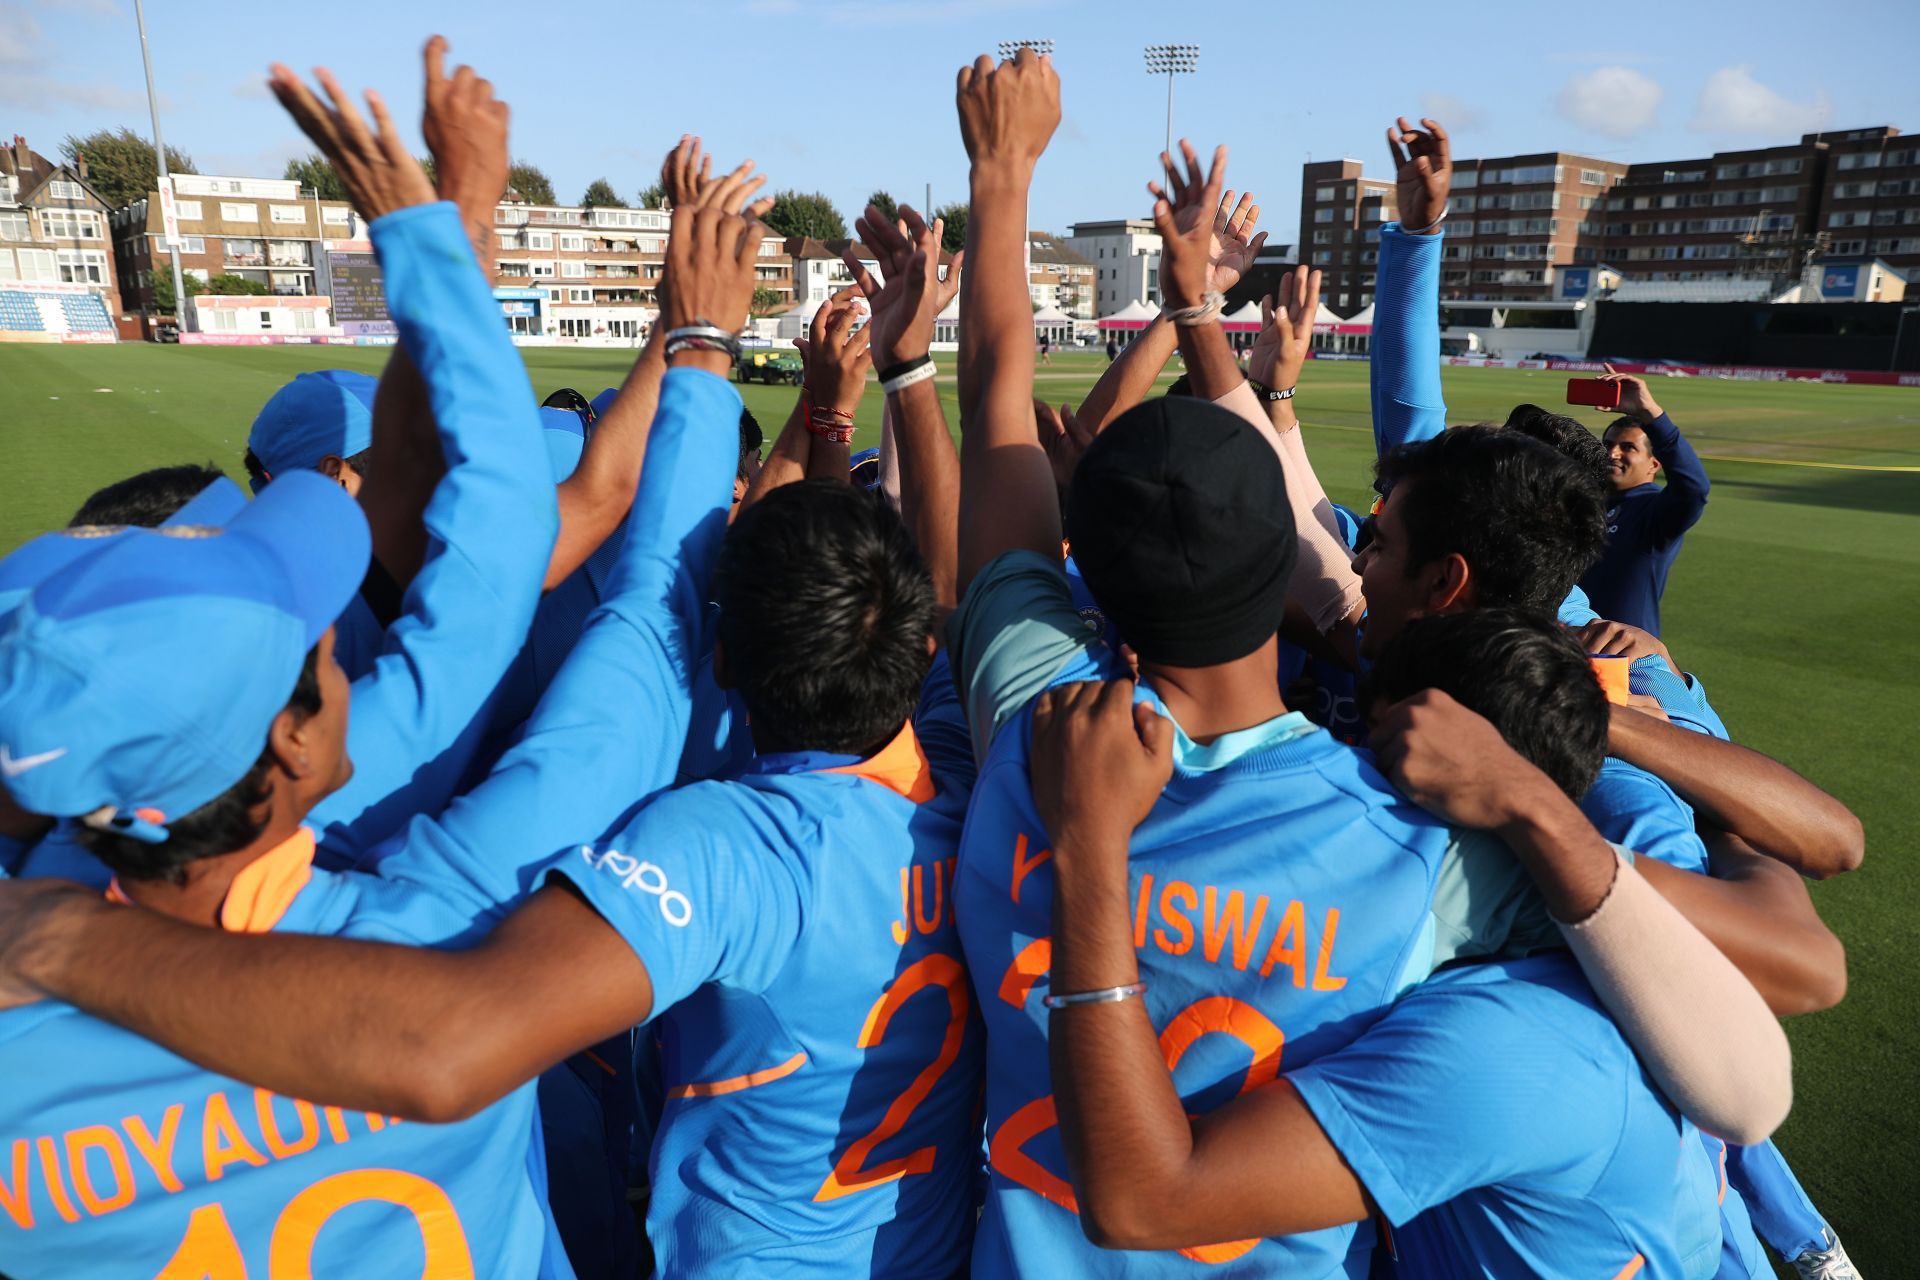 India U19 will be looking to get their second win on the trot.